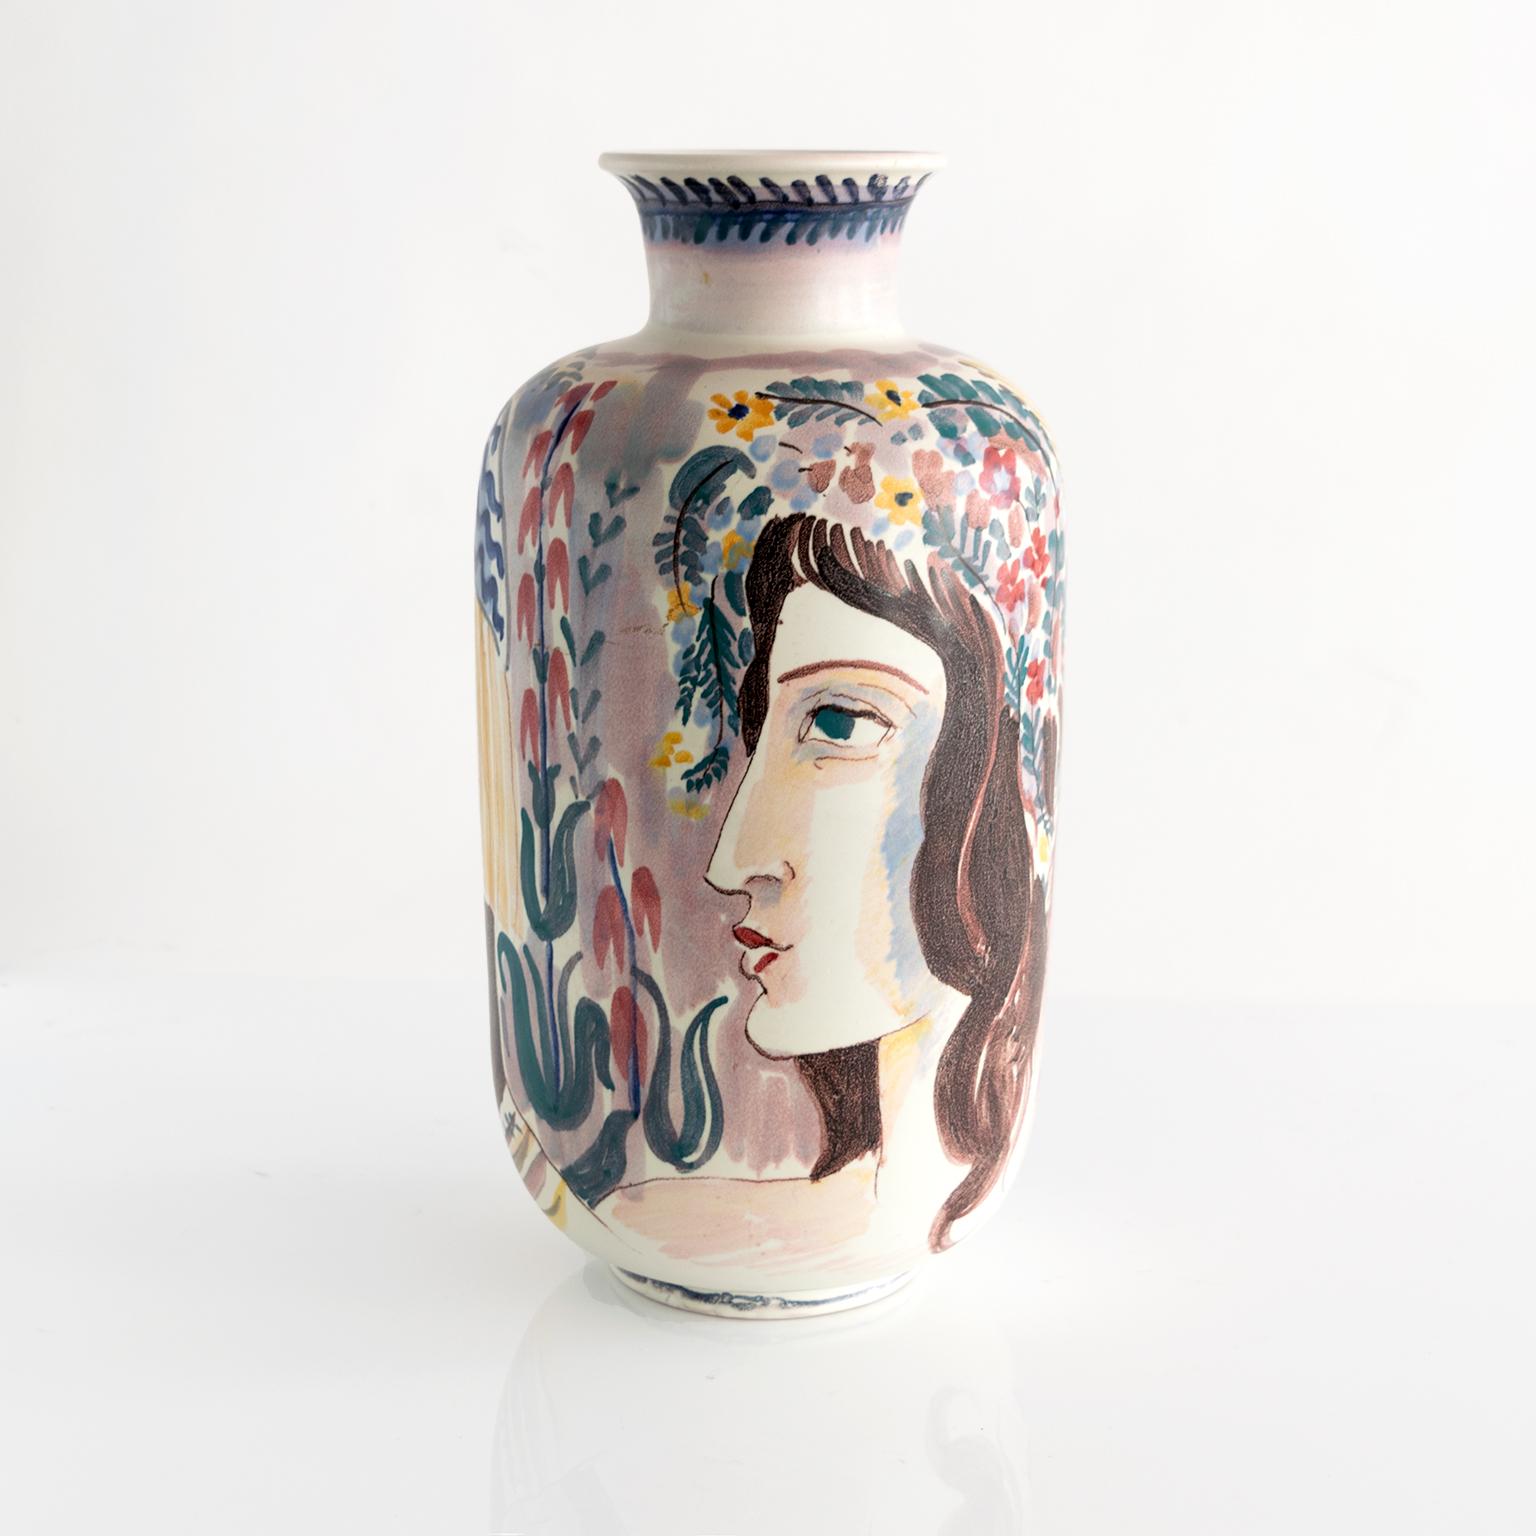 A large hand decorated ceramic vase by Carl-Harry Stalhane for Rorstrand. The vase depicts two women, one playing a flute or piccolo, the background has a tree, birds and lots of flowers. Signed on bottom made in 1944.
 